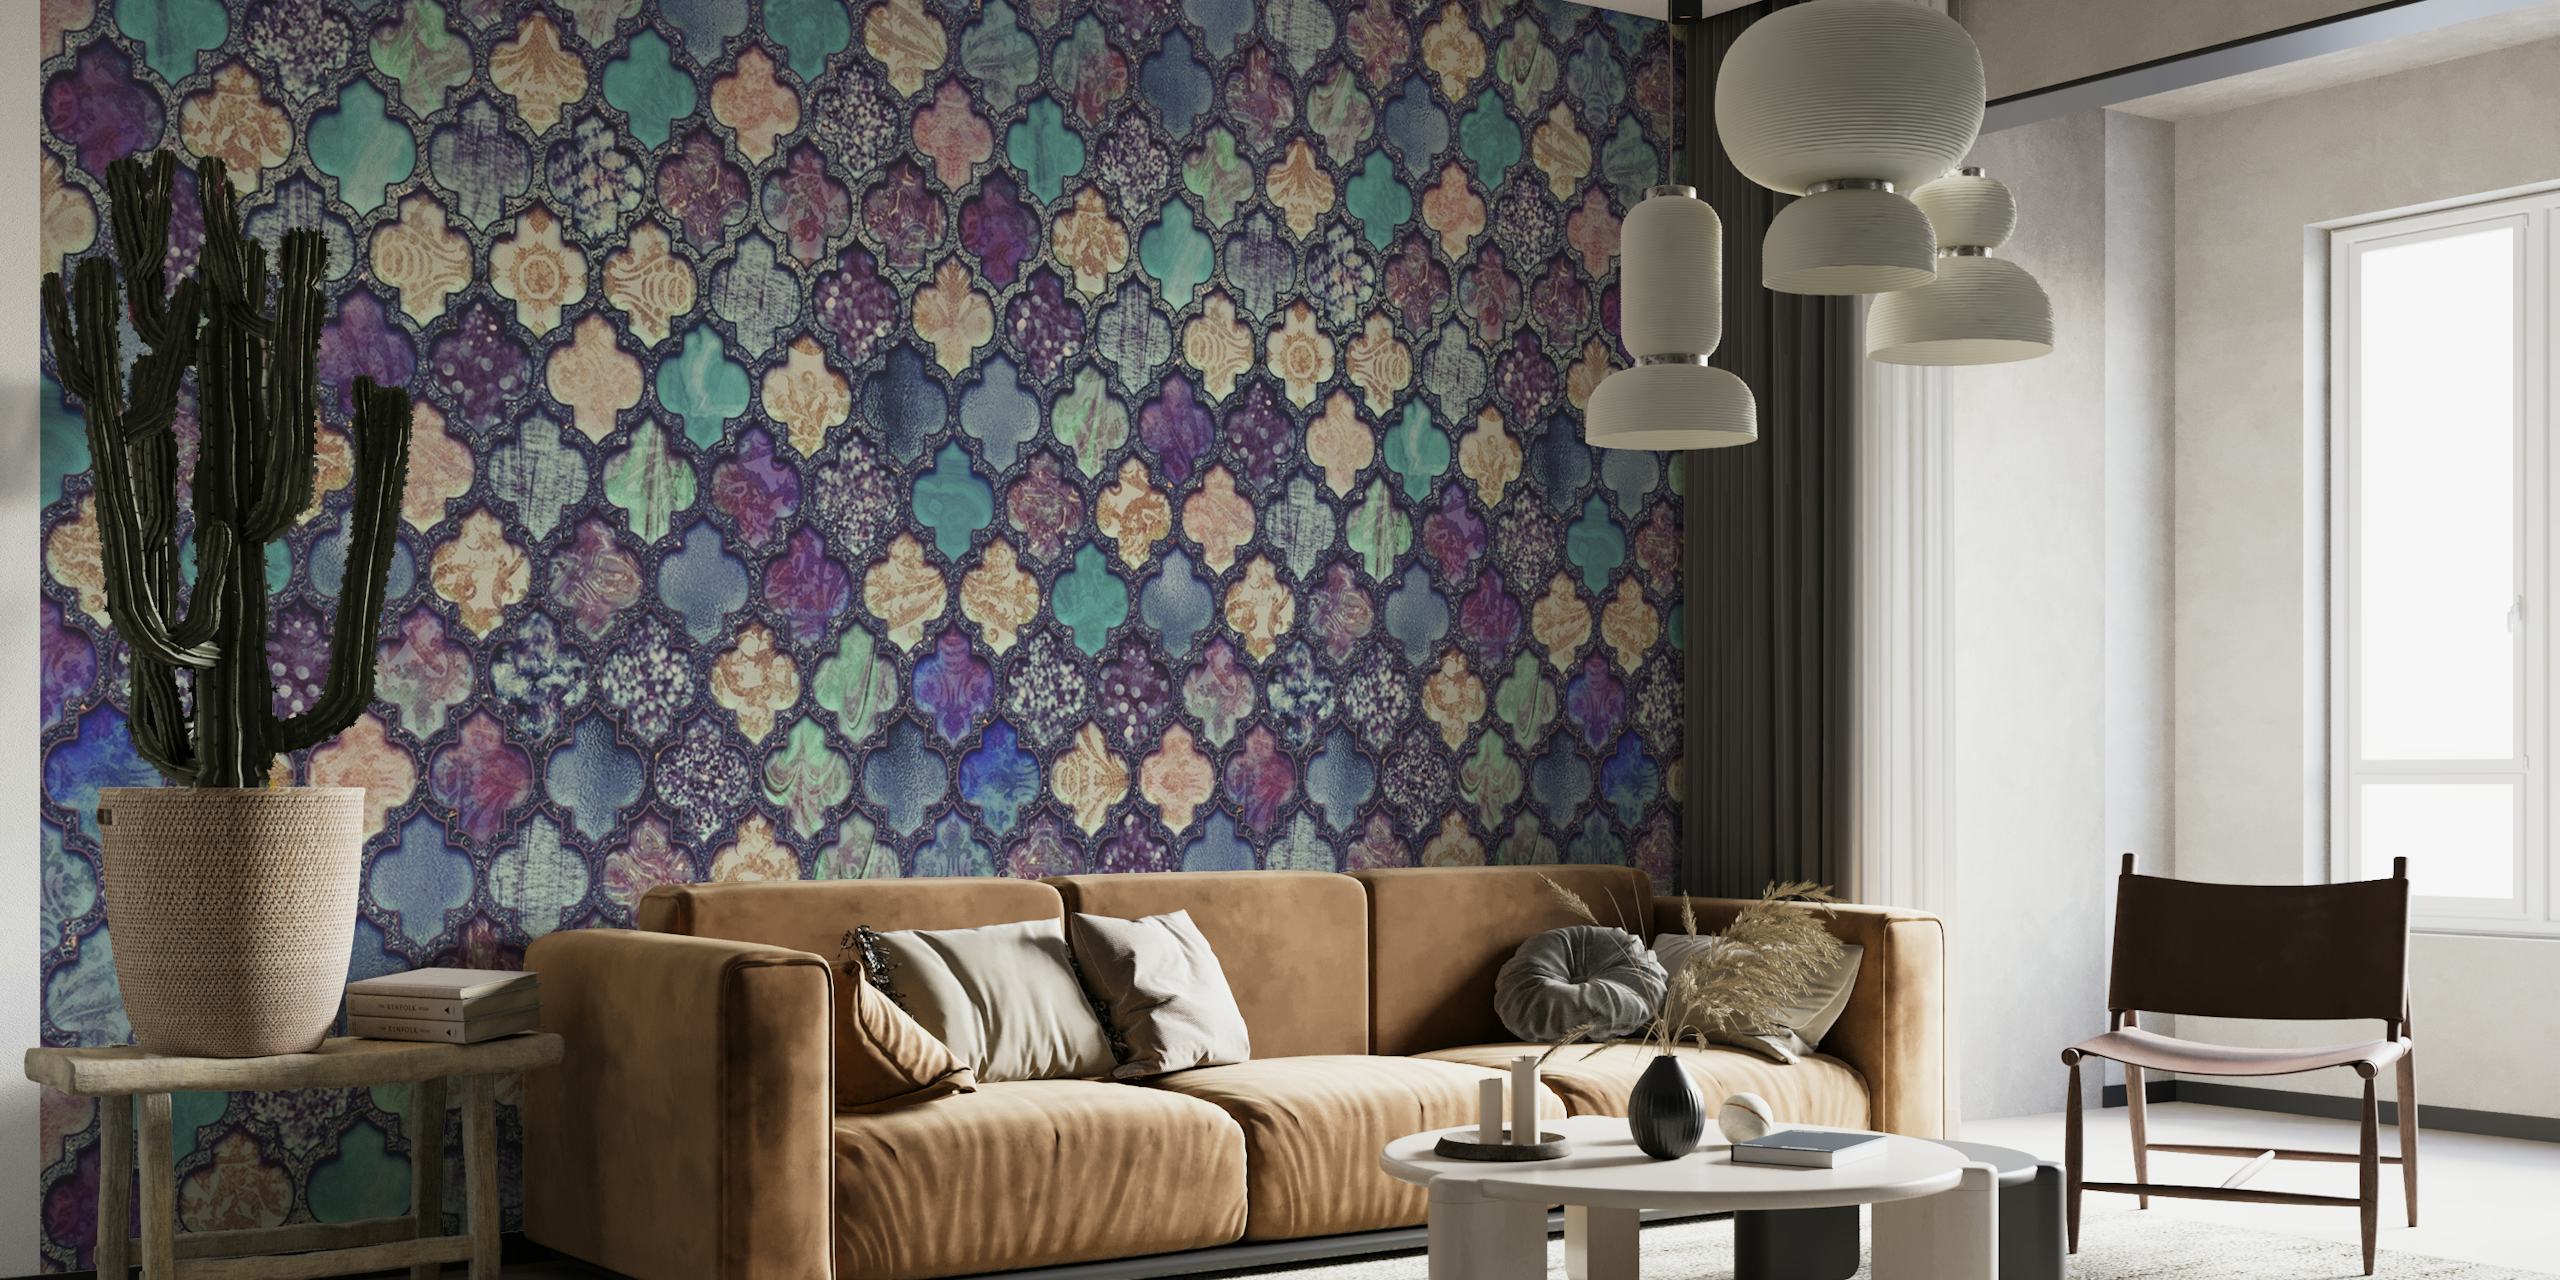 Moroccan Tiles Teal Purple ταπετσαρία